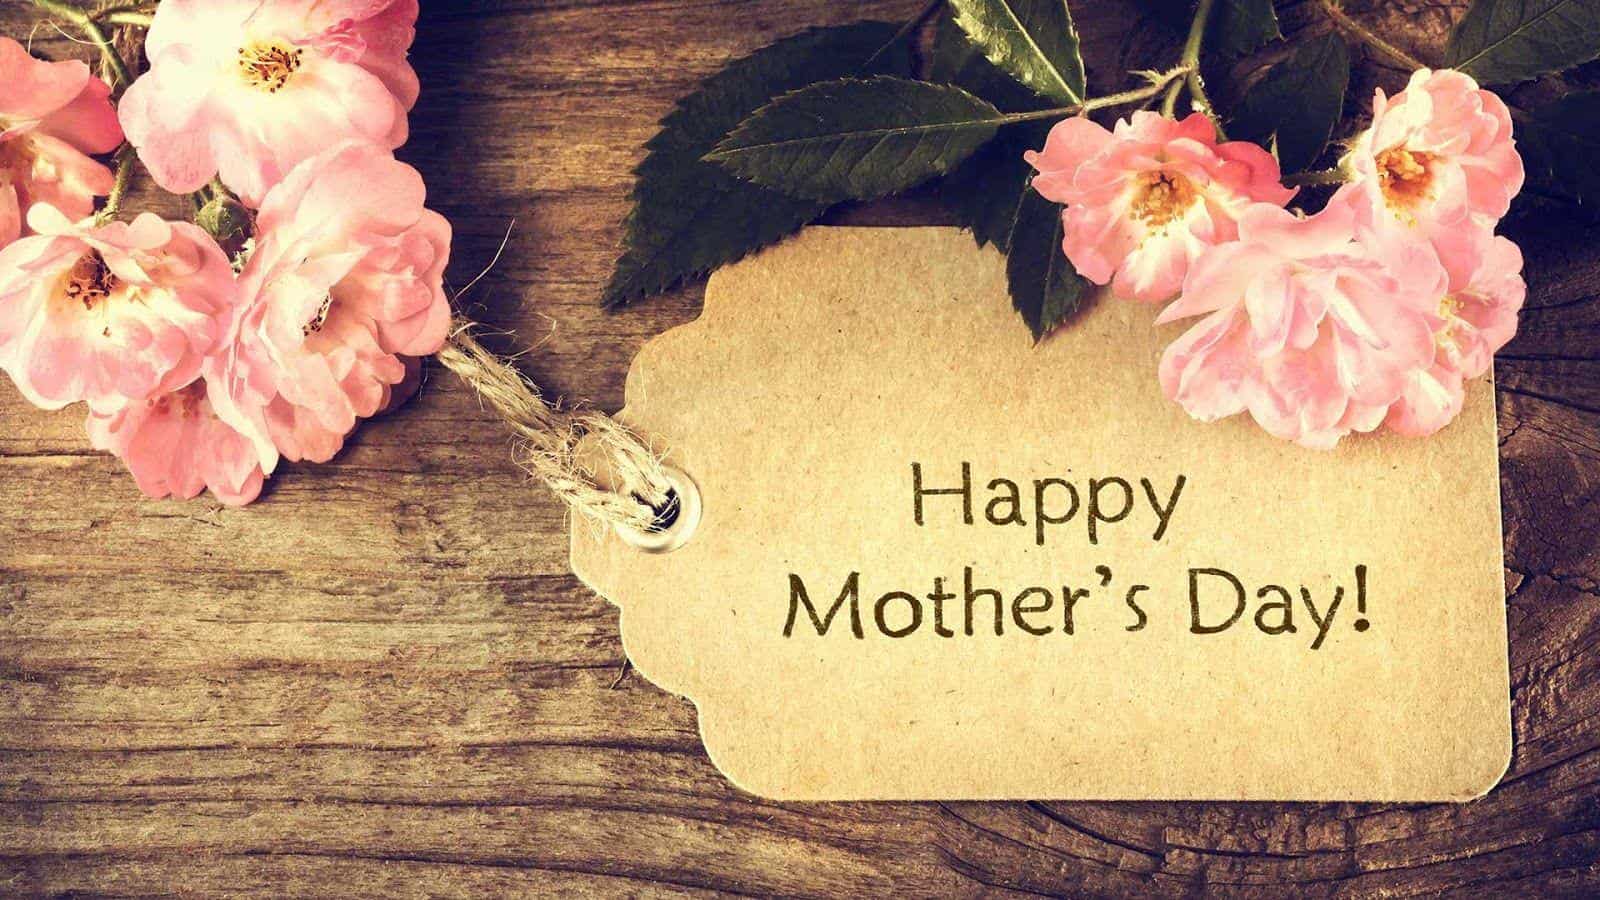 65+] Happy Mothers Day Images 2023, Pics & Photos (HD)